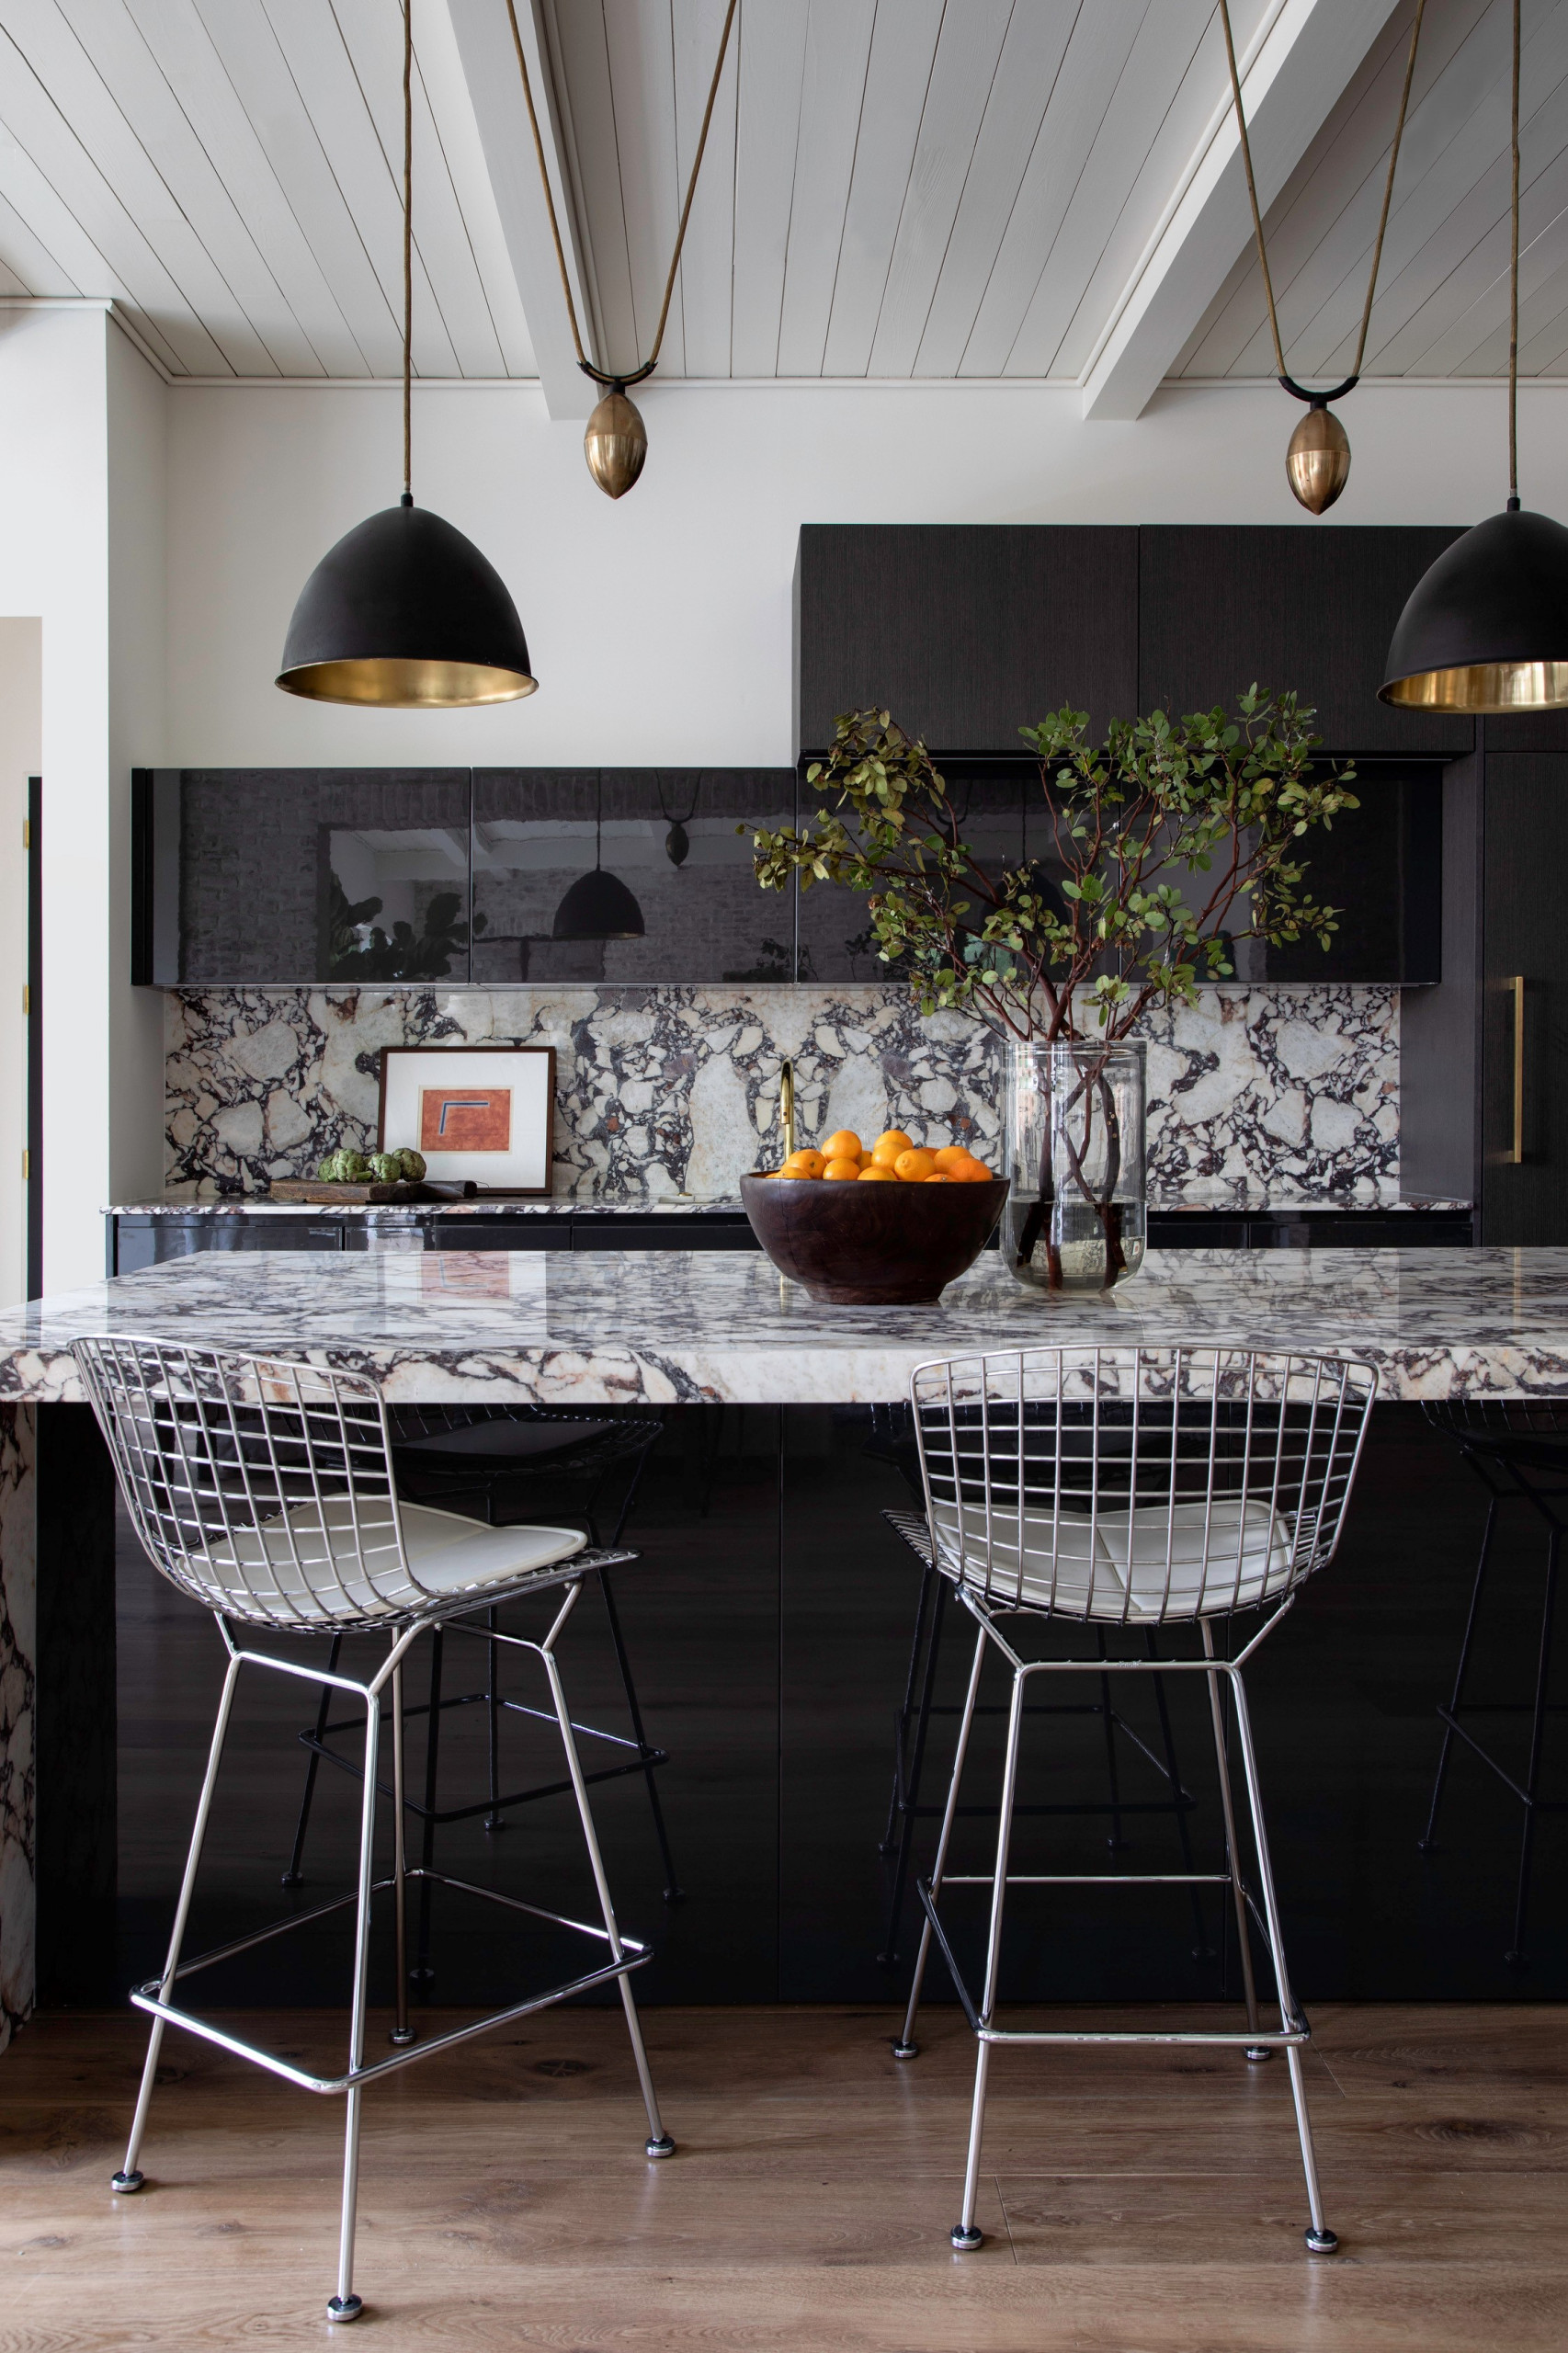 Modern Aesthetic with Clean Lines Kitchen - Dorene Gomez Interiors : Dorene  Gomez Interiors